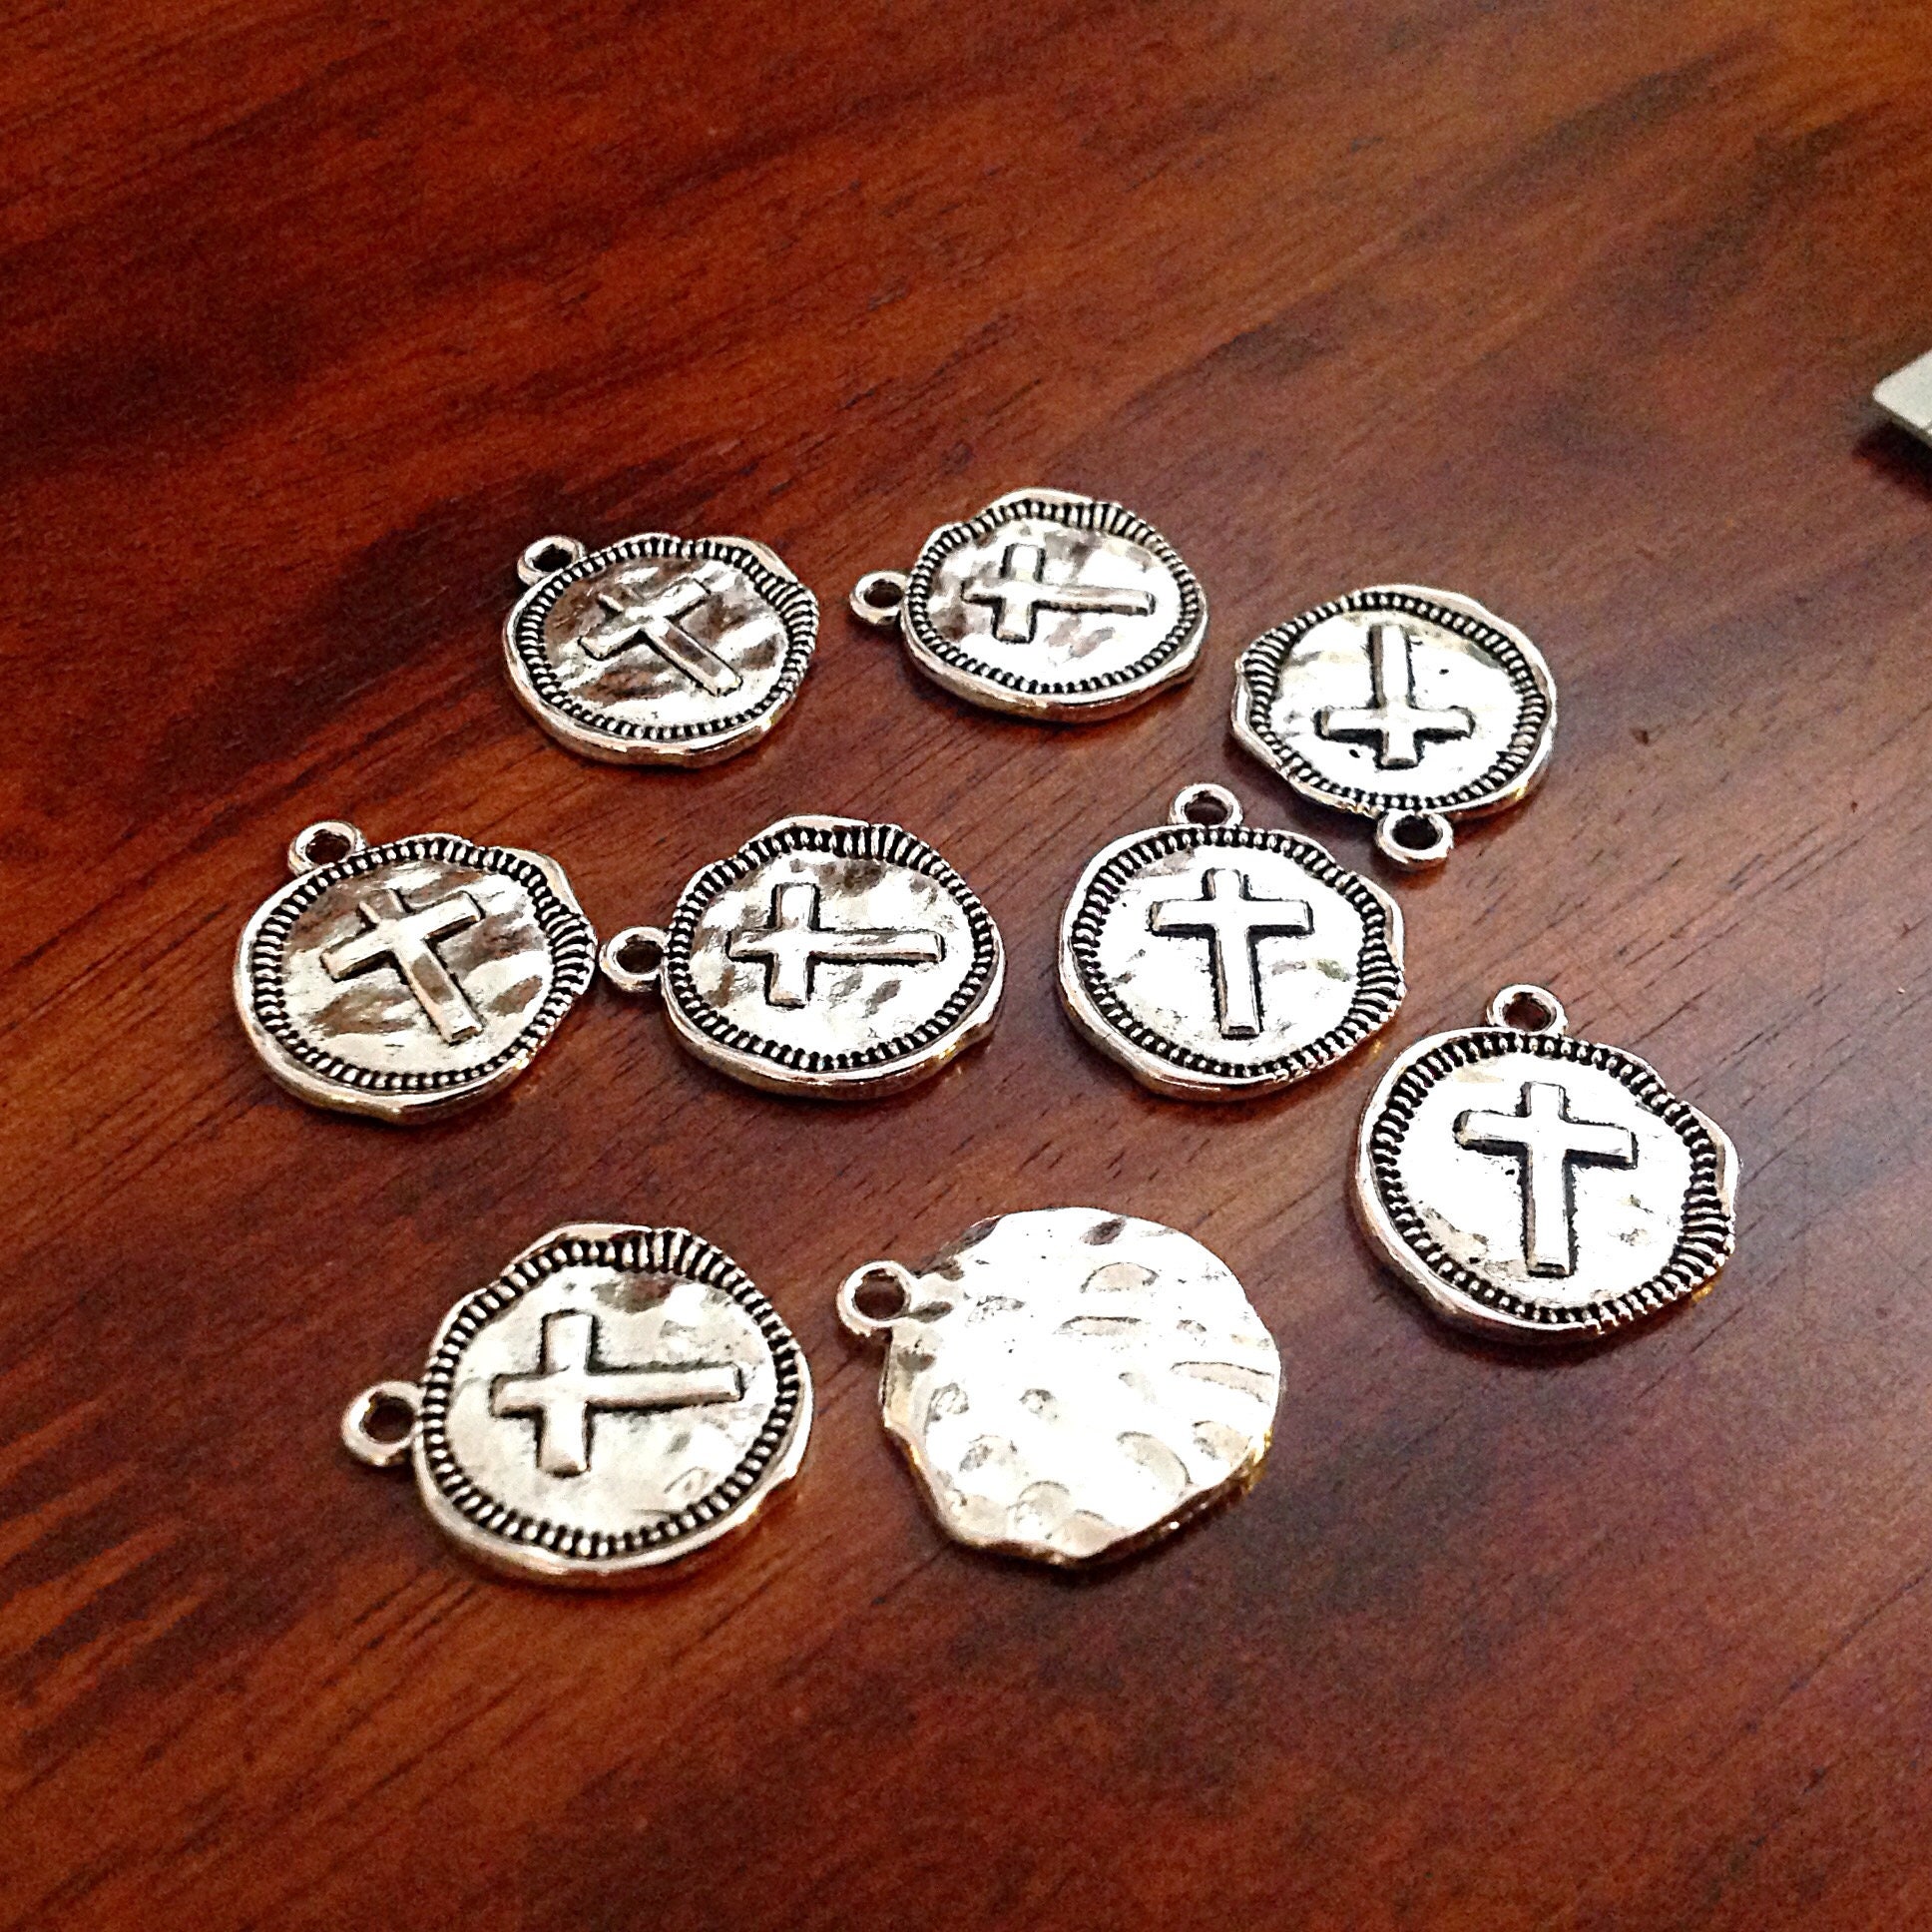 Silver Cross Charms Small Round Flat Disc With Cutout Cross 17mm